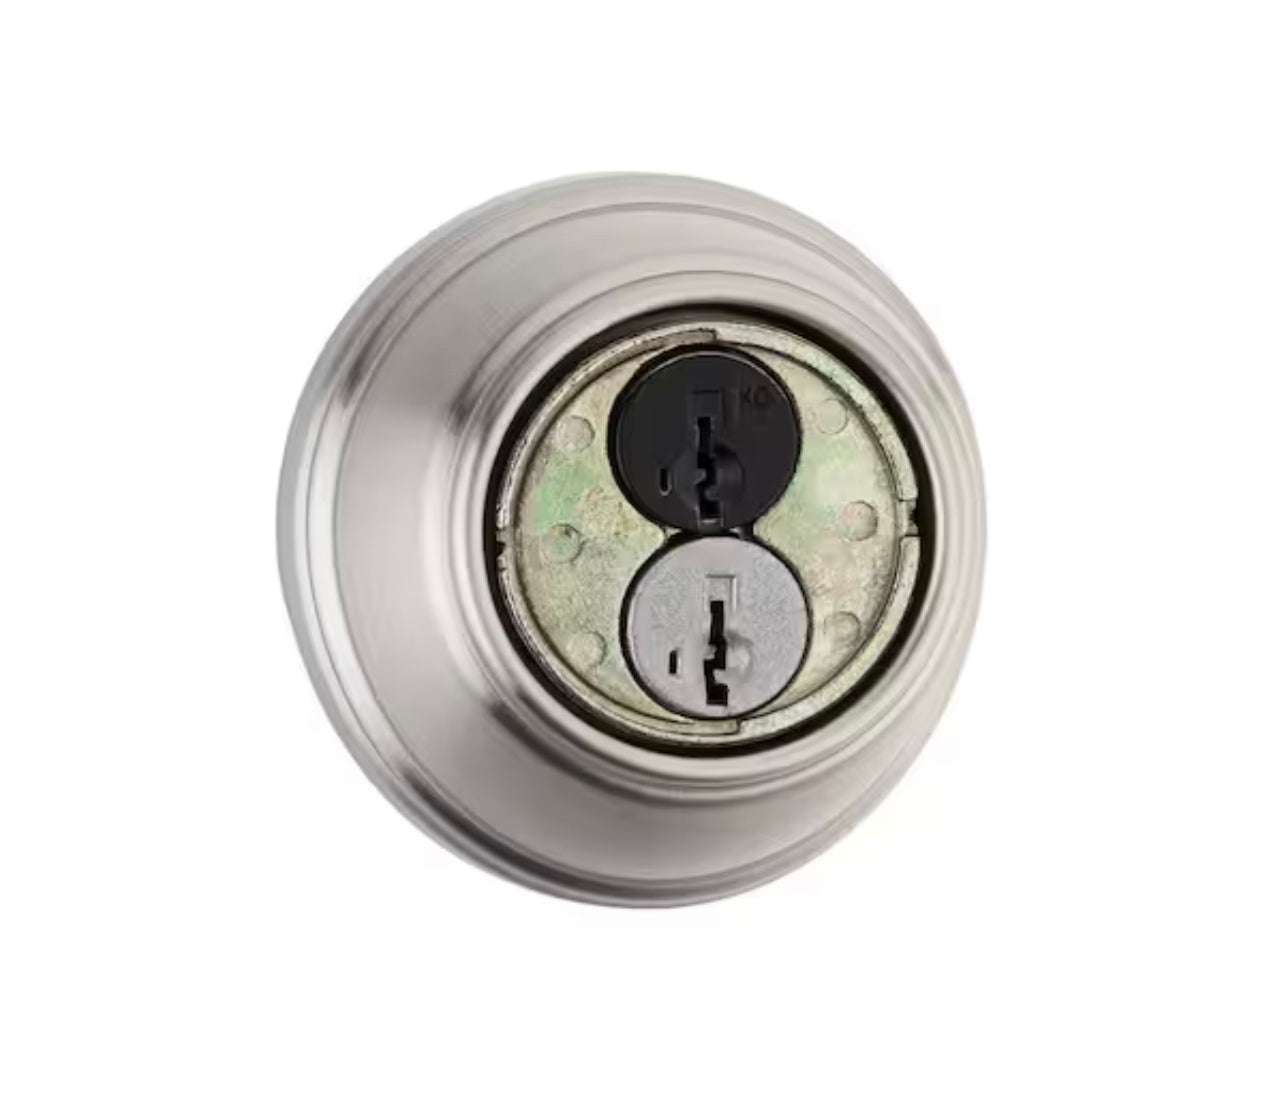 Kwikset 816 Single Cylinder Satin Nickel Key Control Deadbolt Featuring SmartKey Security with Microban Antimicrobial Technology Damaged Box